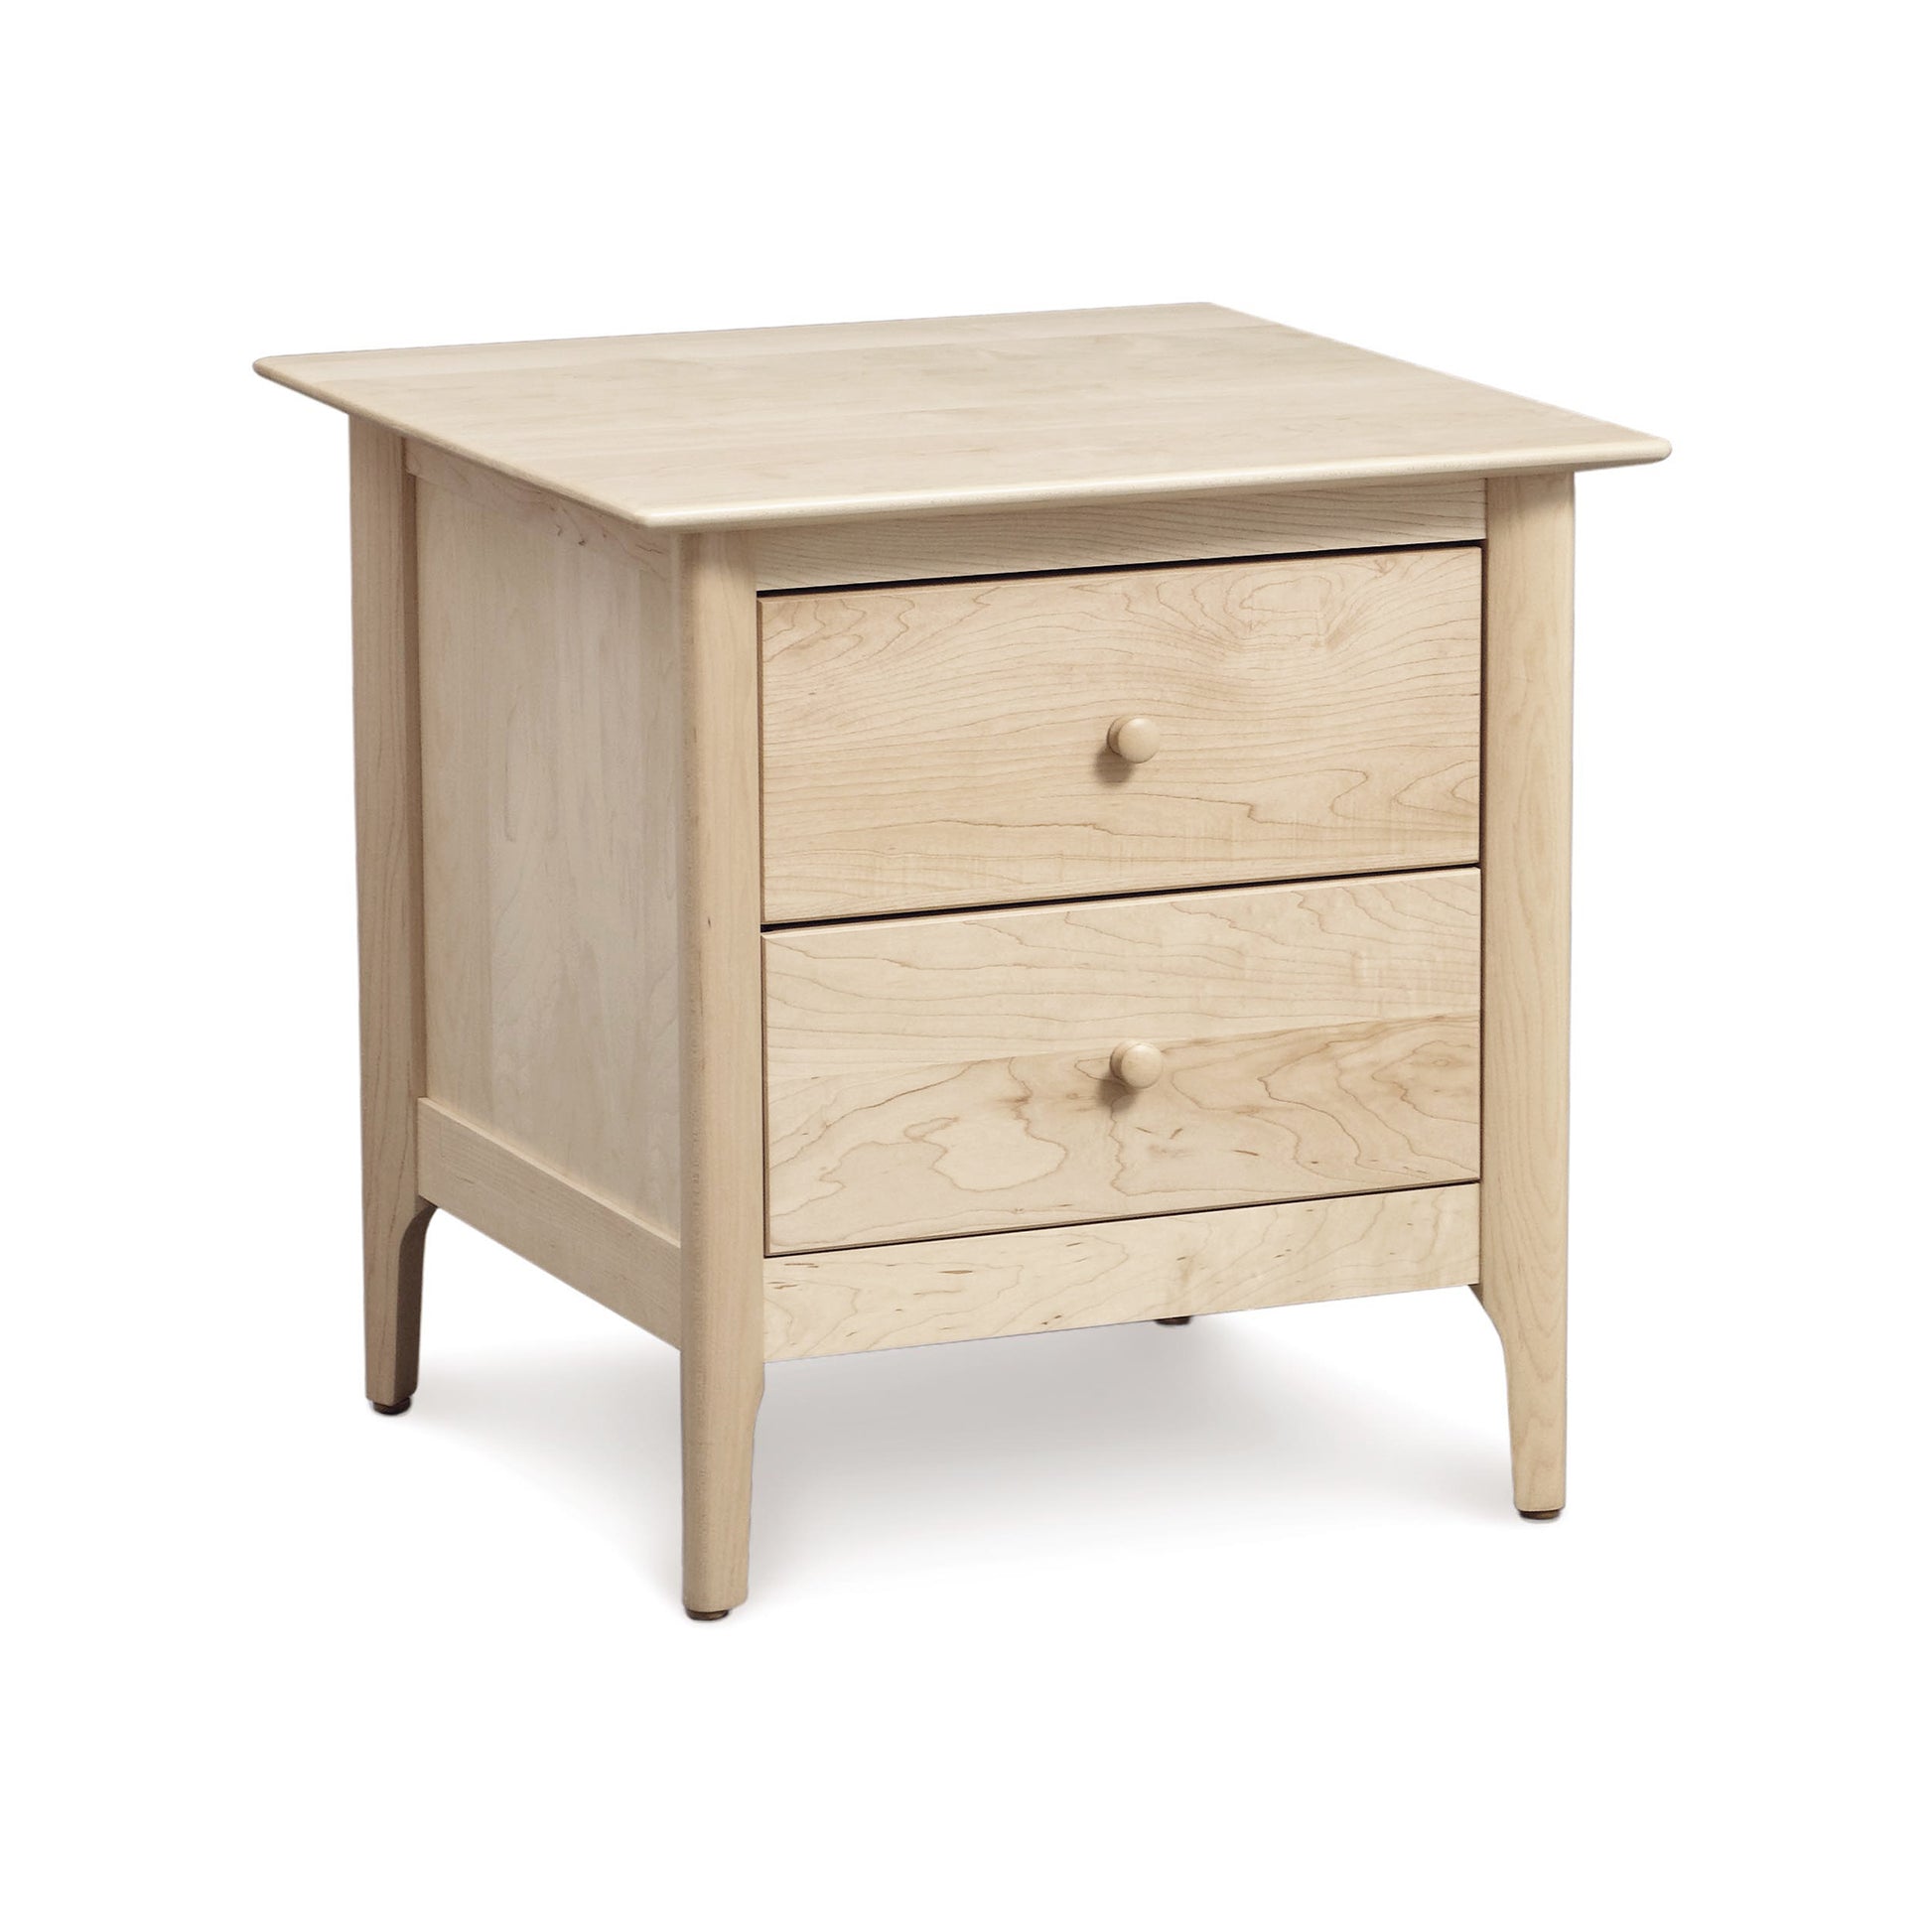 Sarah 2-Drawer Nightstand from Copeland Furniture, isolated on a white background.